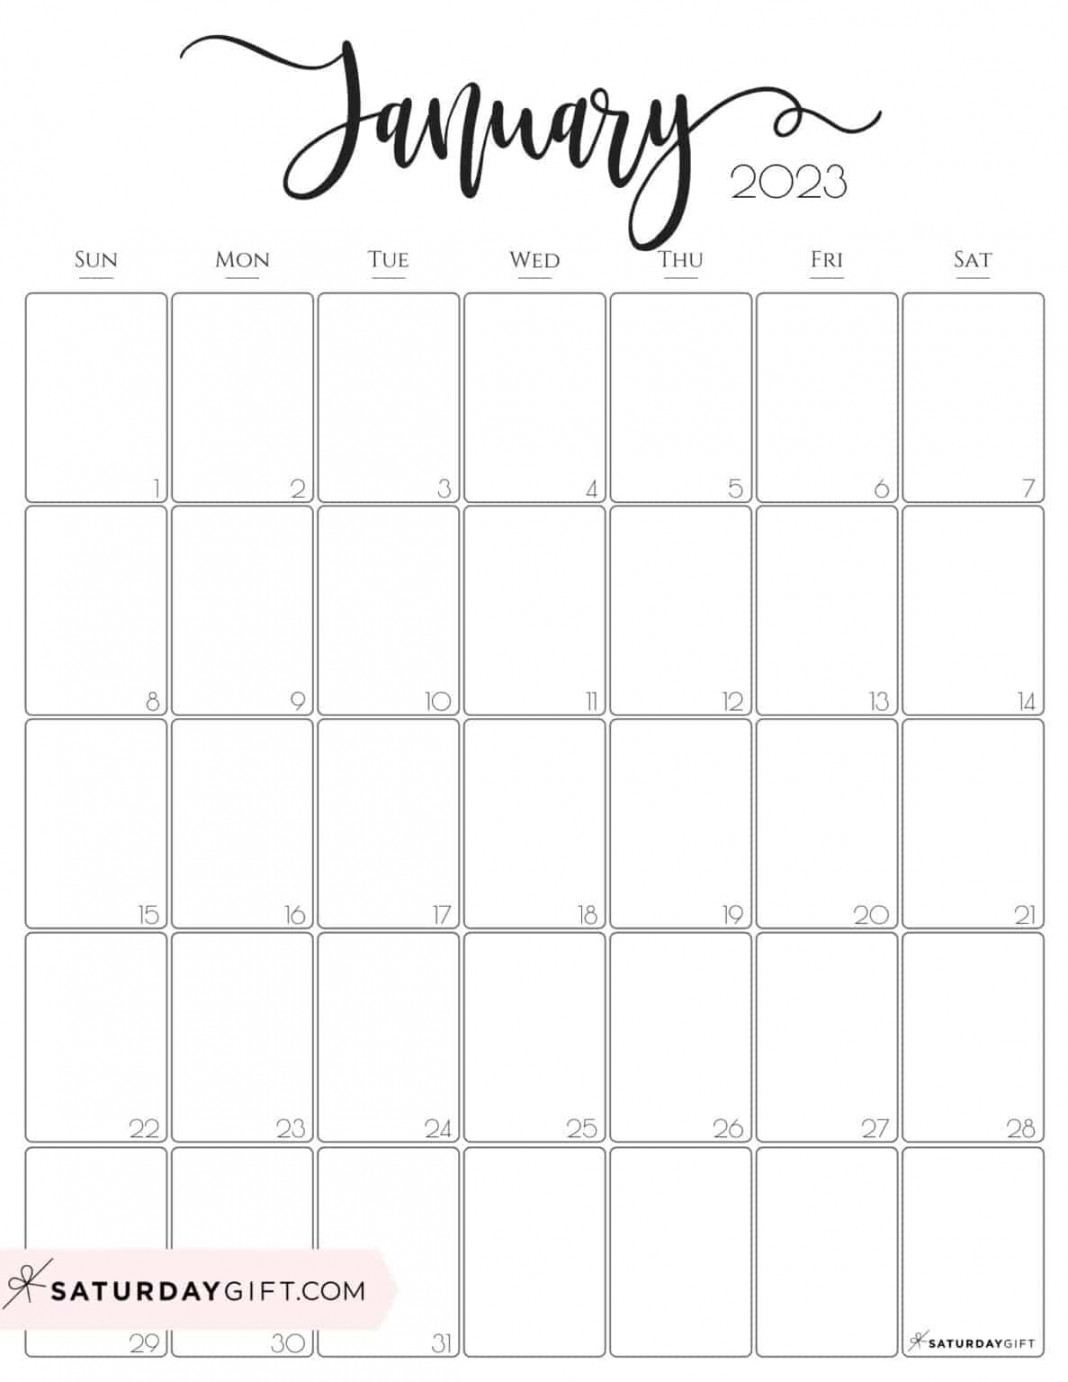 FREE Cute Printable Calendars: monthly & yearly  YesMissy